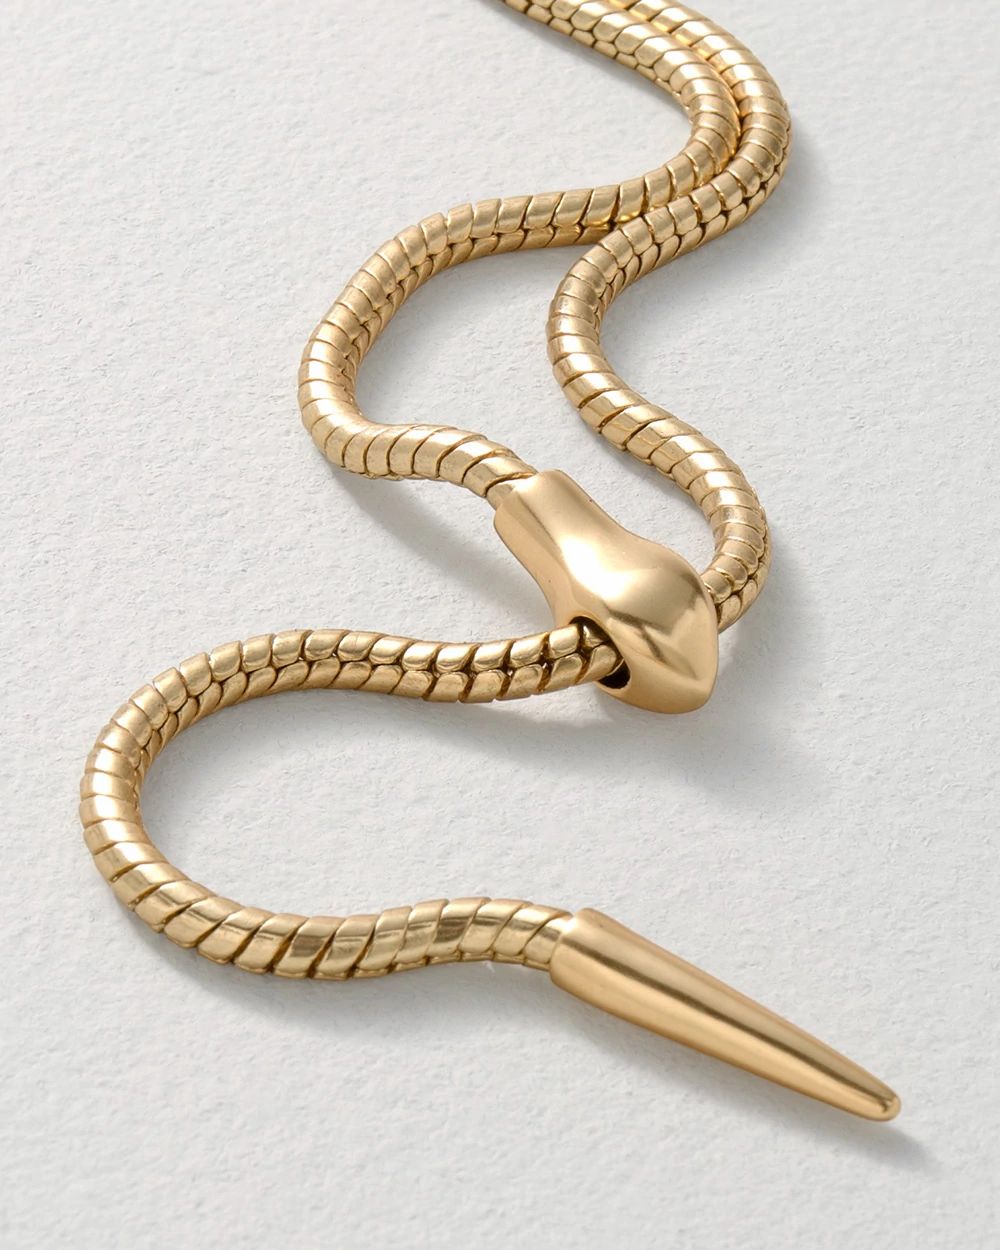 Goldtone Snake Y-Necklace click to view larger image.